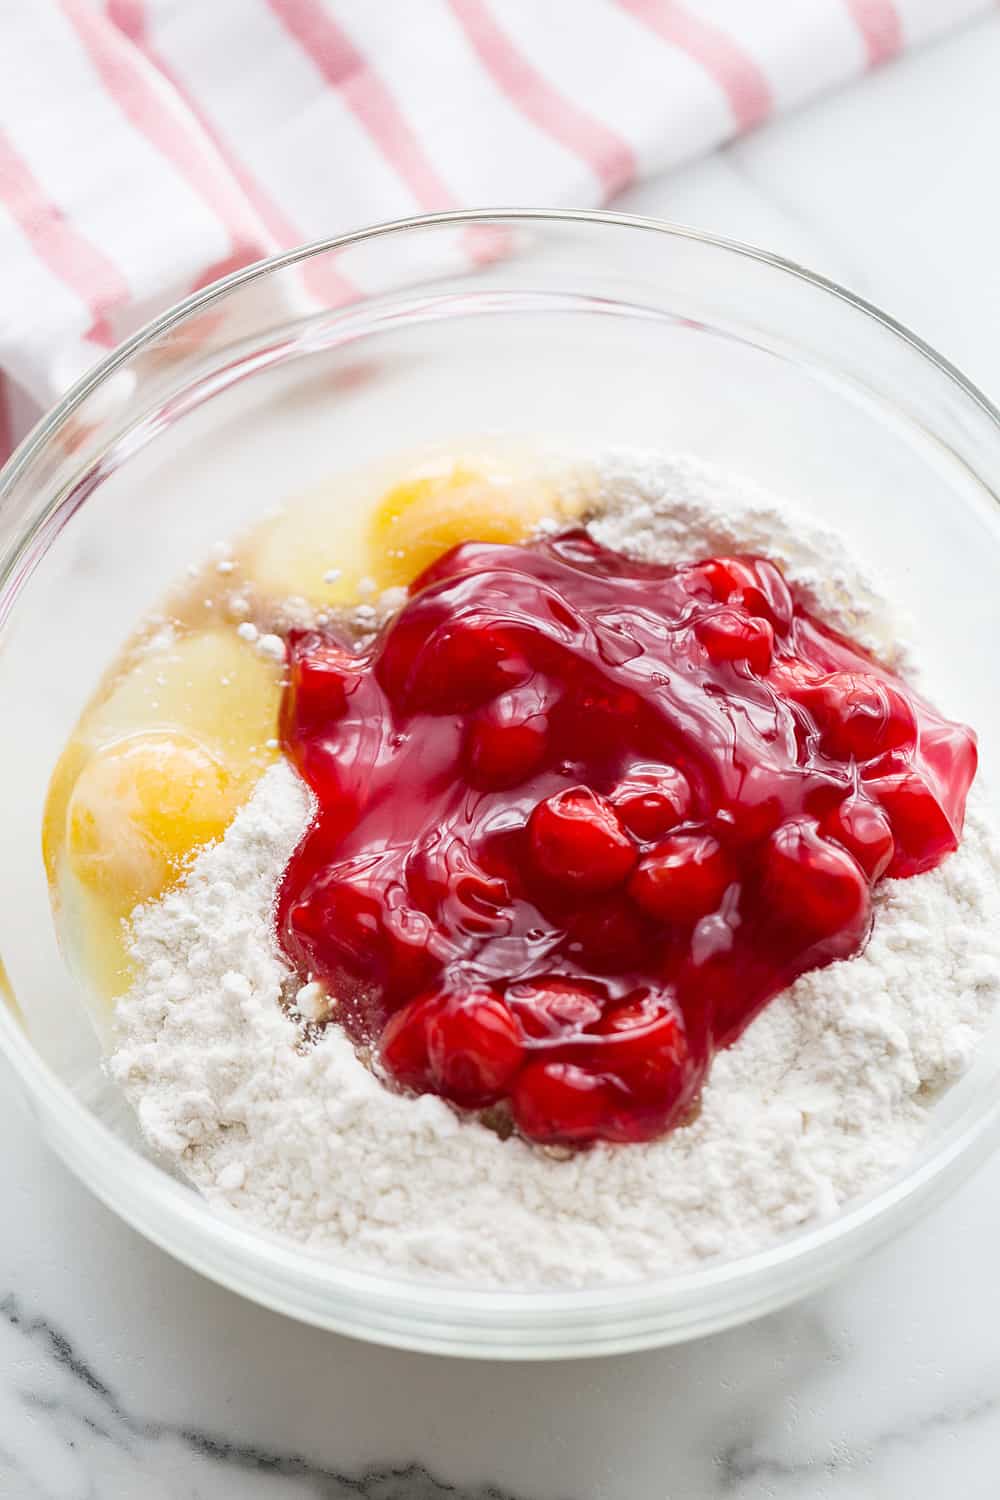 Easy Cherry Cake - Easy cherry cake with whipped topping is unbelievably delicious and requires only a white cake mix, cherry pie filling, and a few other ingredients. Whipped topping frosting is the finishing touch! #cherry #cherrycake #cakemix #cake #baking #sweets #dessert #halfscratched